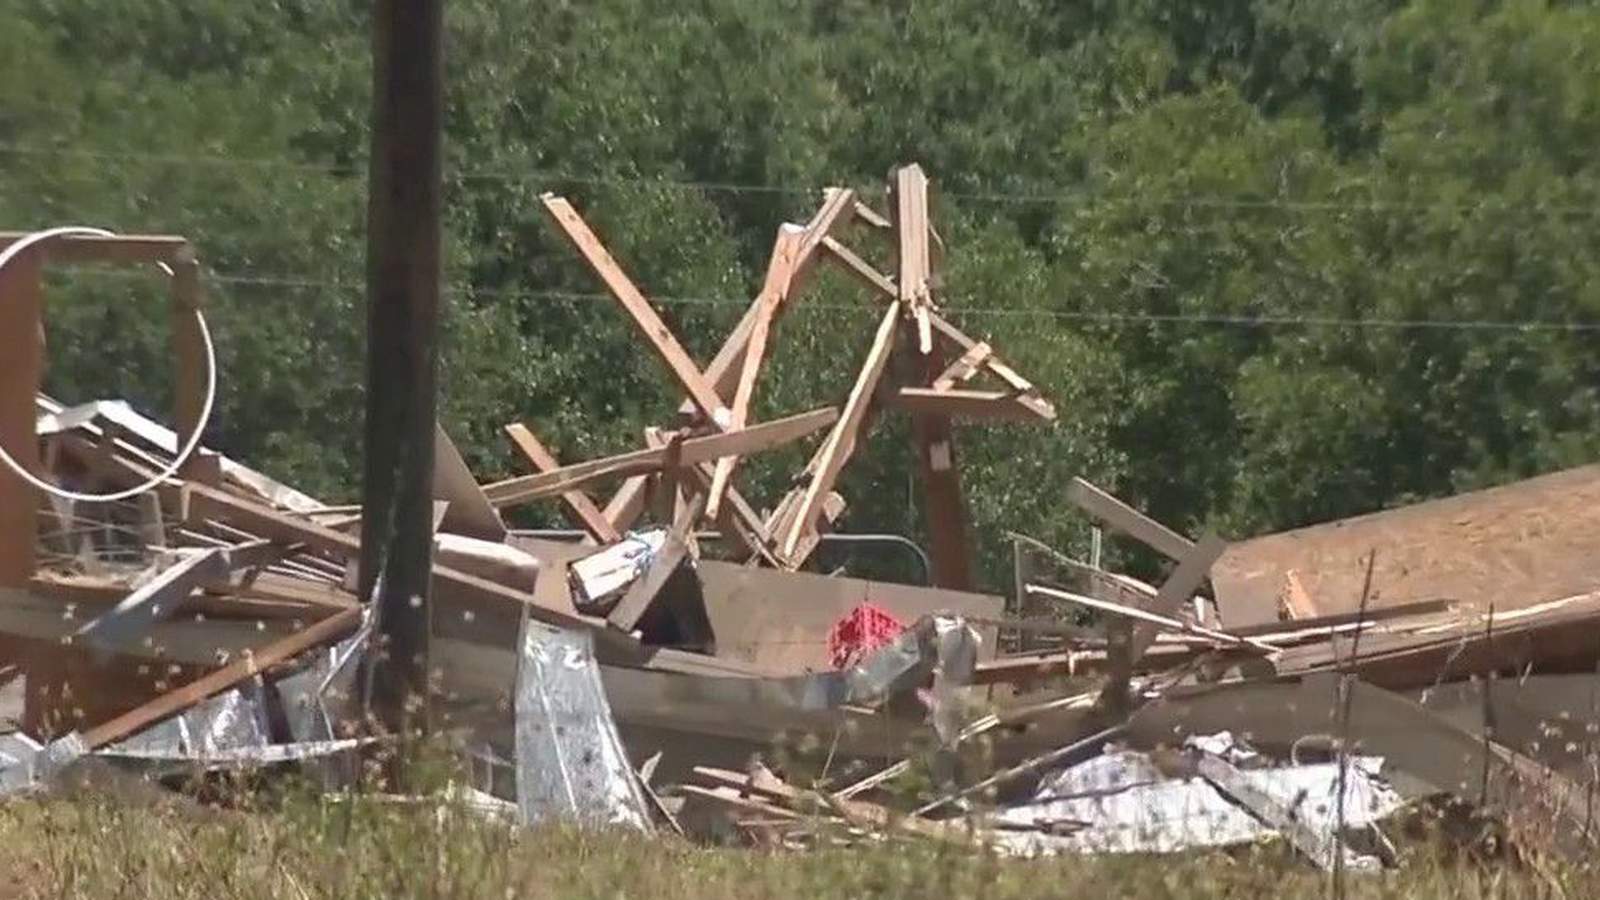 NWS: Tornado touched down near La Vernia on Sunday